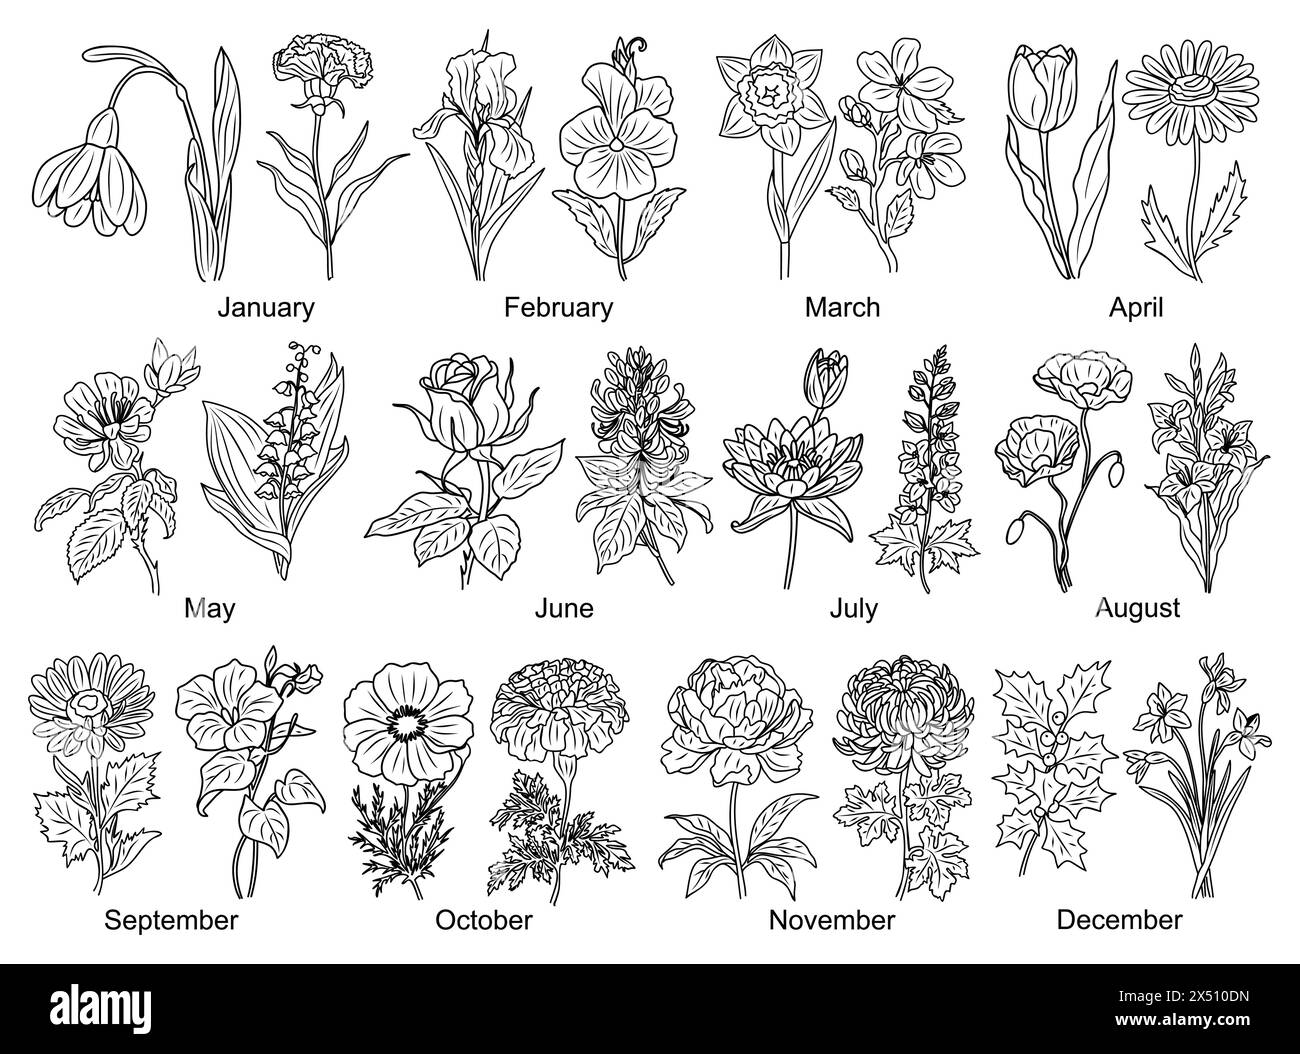 Set of Birth month flowers line art vector illustrations. Snowdrop, Violet, Cherry Blossom, Water lily, poppy, morning glory, cosmos, chrysanthemum, r Stock Vector